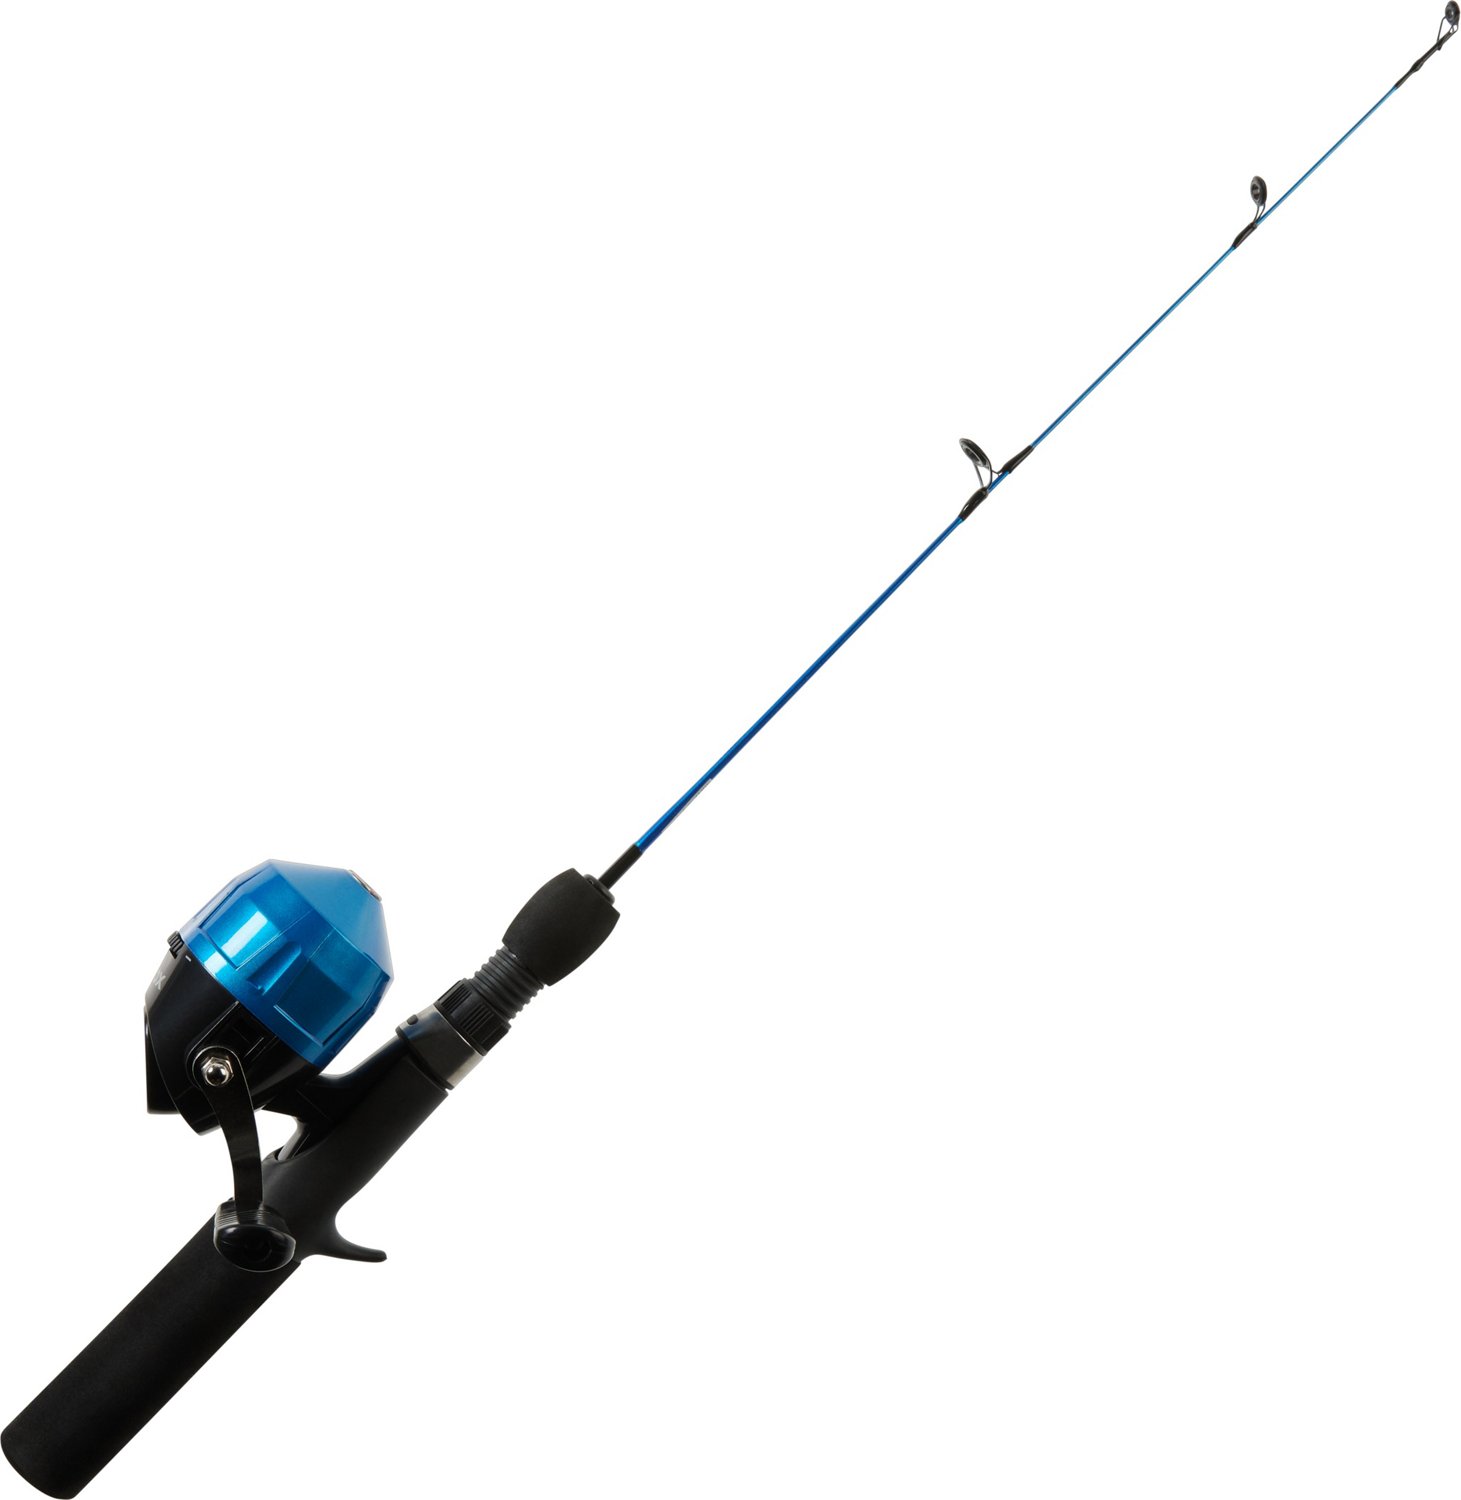 Fishing Rod Combo Spinning Fishing Wheel Sea Rod 1.8-3.3M Full Kit Telescopic  Spinning Rod Reel Fishing Tackle 27M and BS5000, Rod & Reel Combos -   Canada